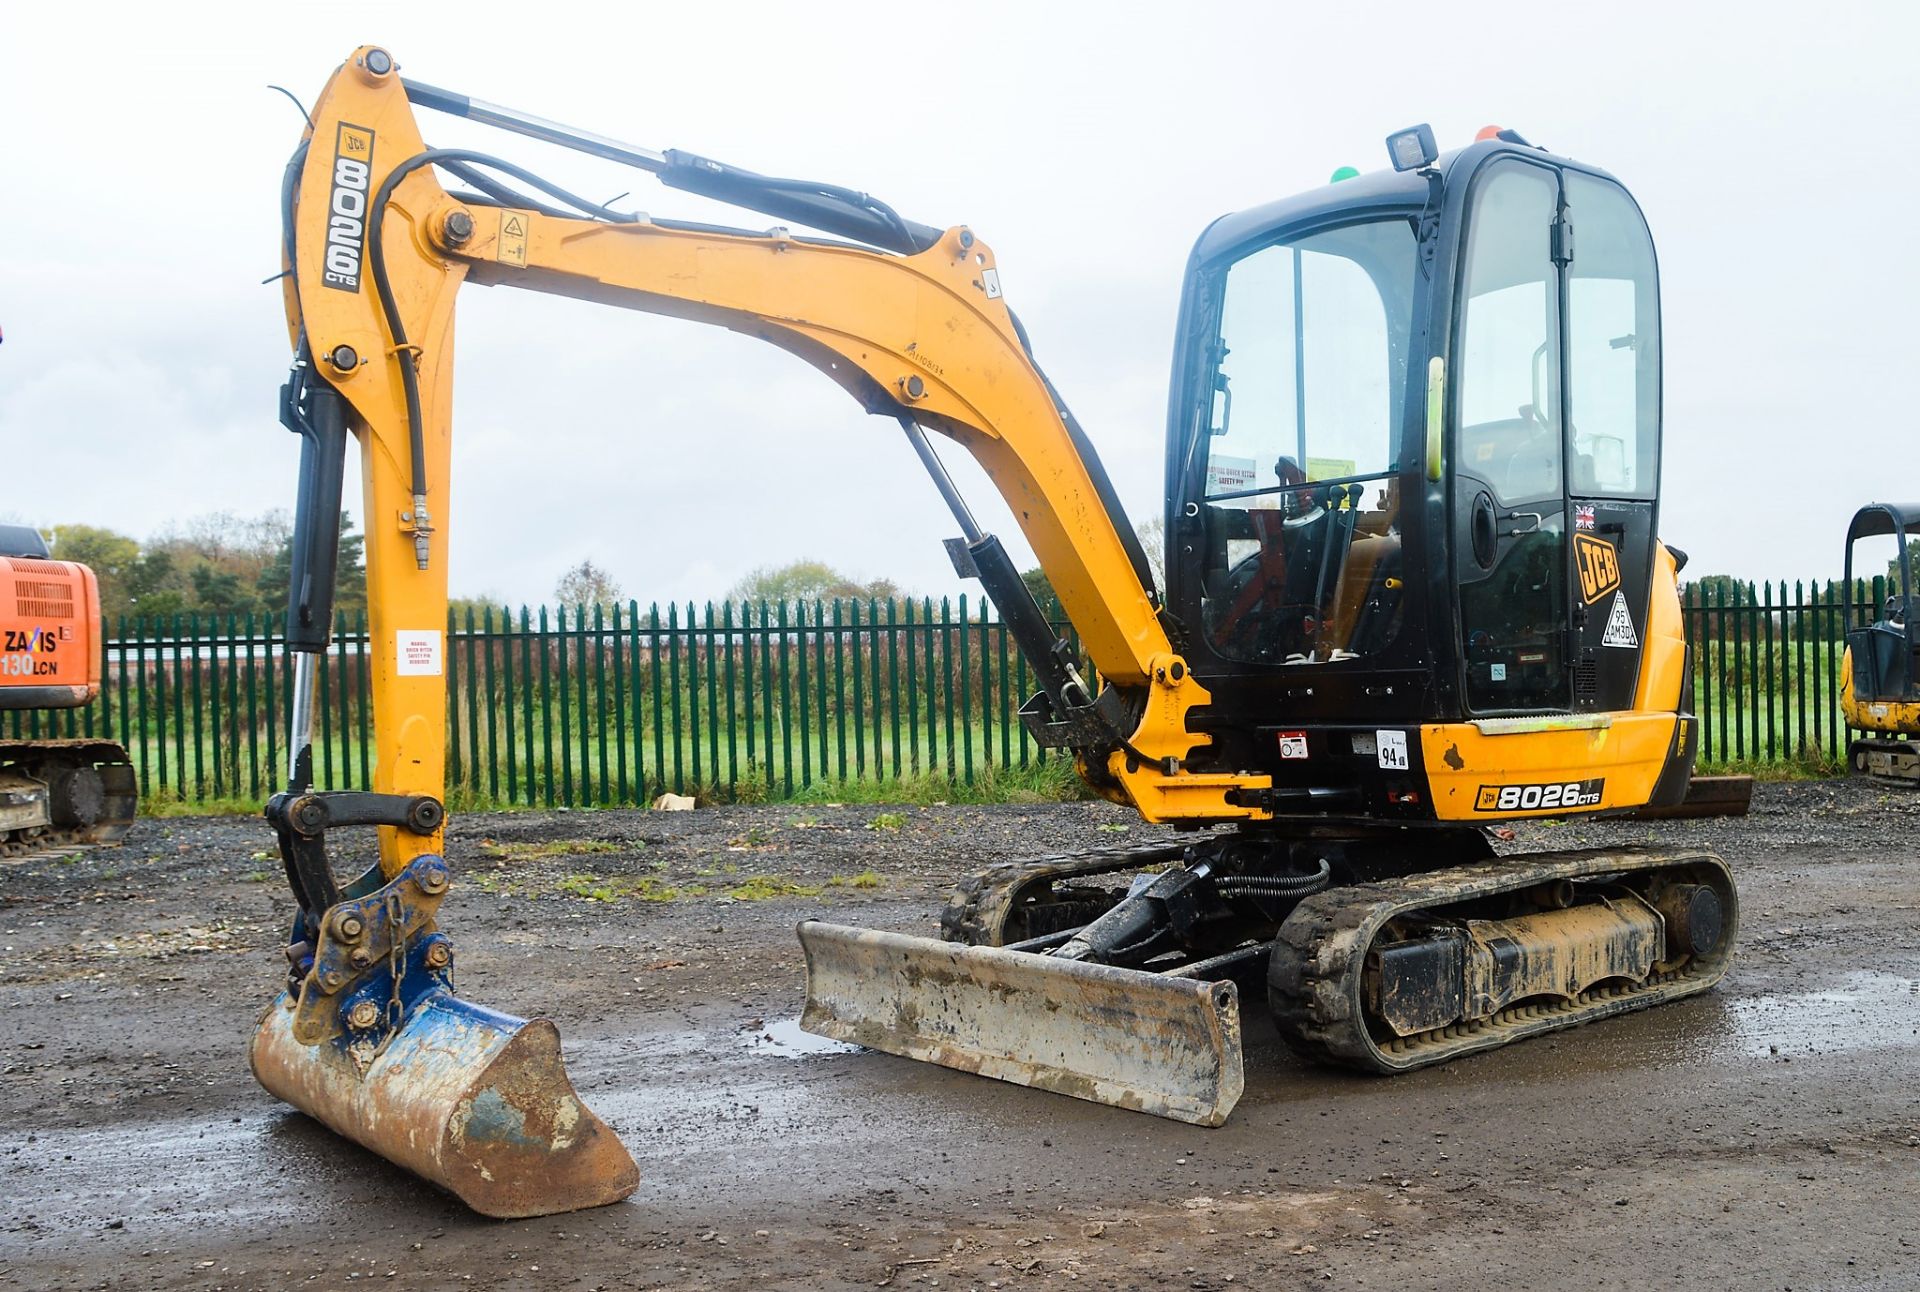 JCB 8026 CTS 2.6 tonne rubber tracked excavator Year: 2015 S/N: 1780389 Recorded Hours: 903 blade,